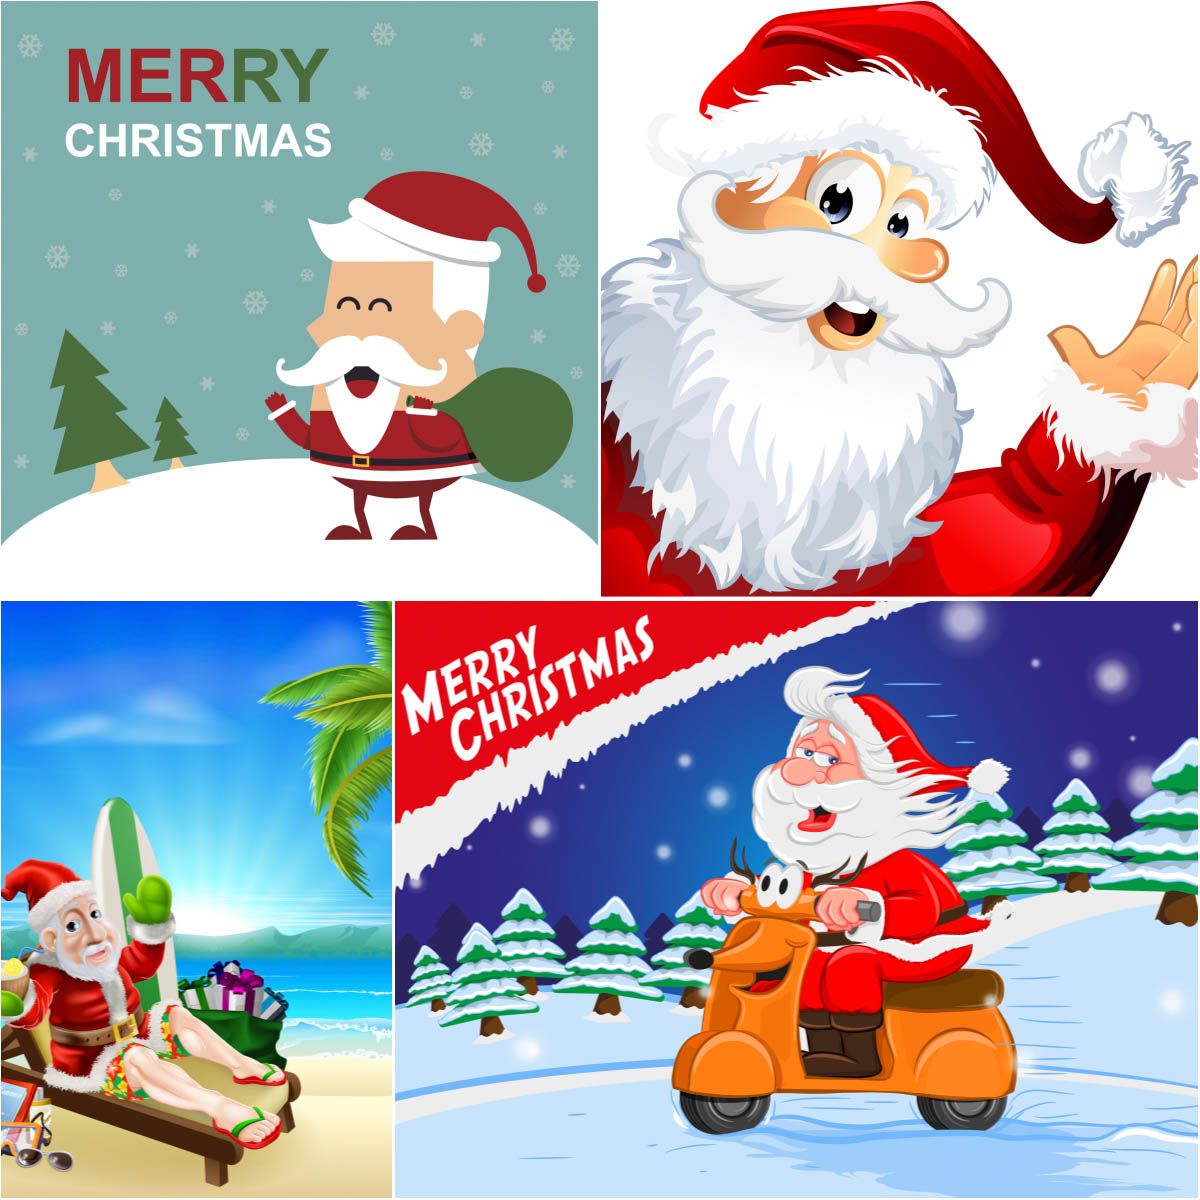 Santa Claus on a motorcycle in the form of a deer backgrounds